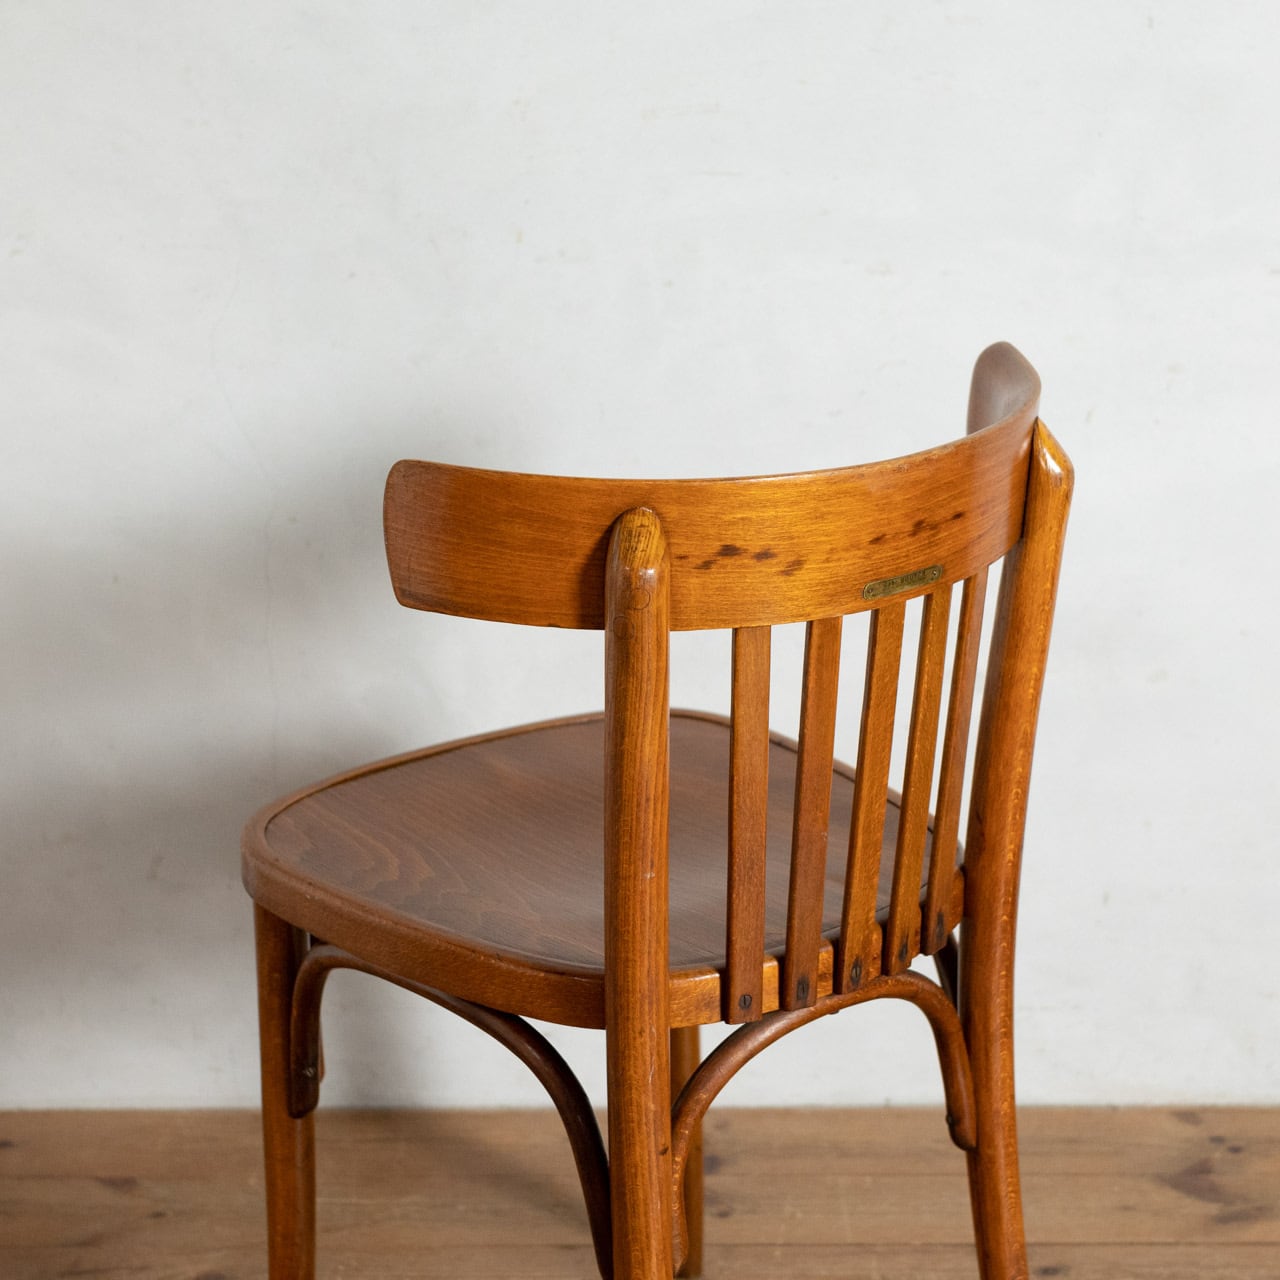 Bentwood Chair / ベントウッド  チェア【B】〈カフェチェア・ダイニングチェア・トーネット・THONET・アンティーク・ヴィンテージ〉113001 | SHABBY'S  MARKETPLACE　アンティーク・ヴィンテージ 家具や雑貨のお店 powered by BASE